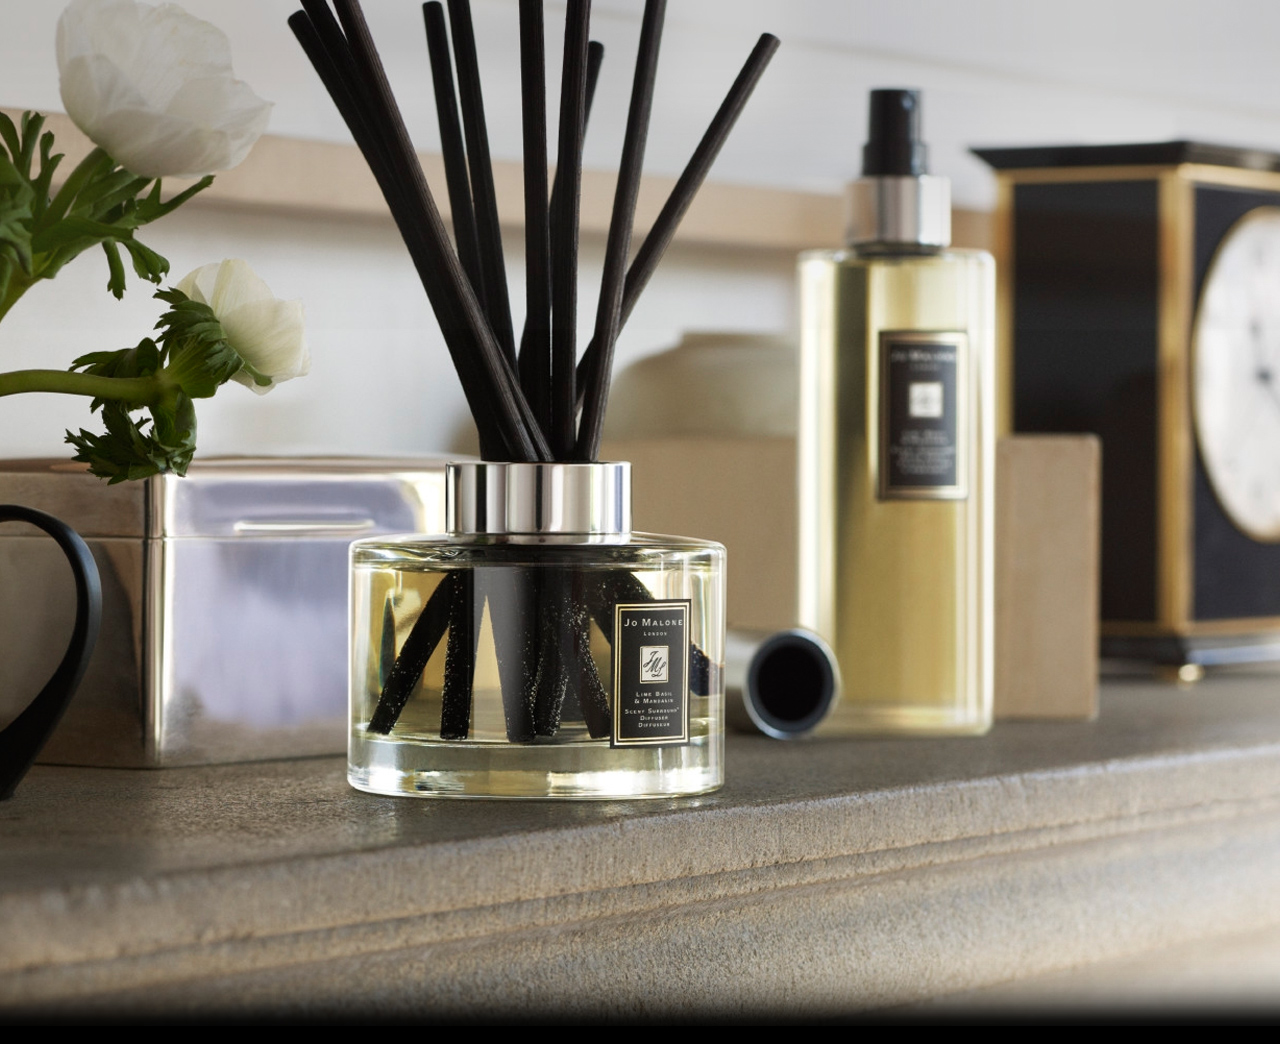 interior-ista: Jo Malone introduces new products to Home Collection